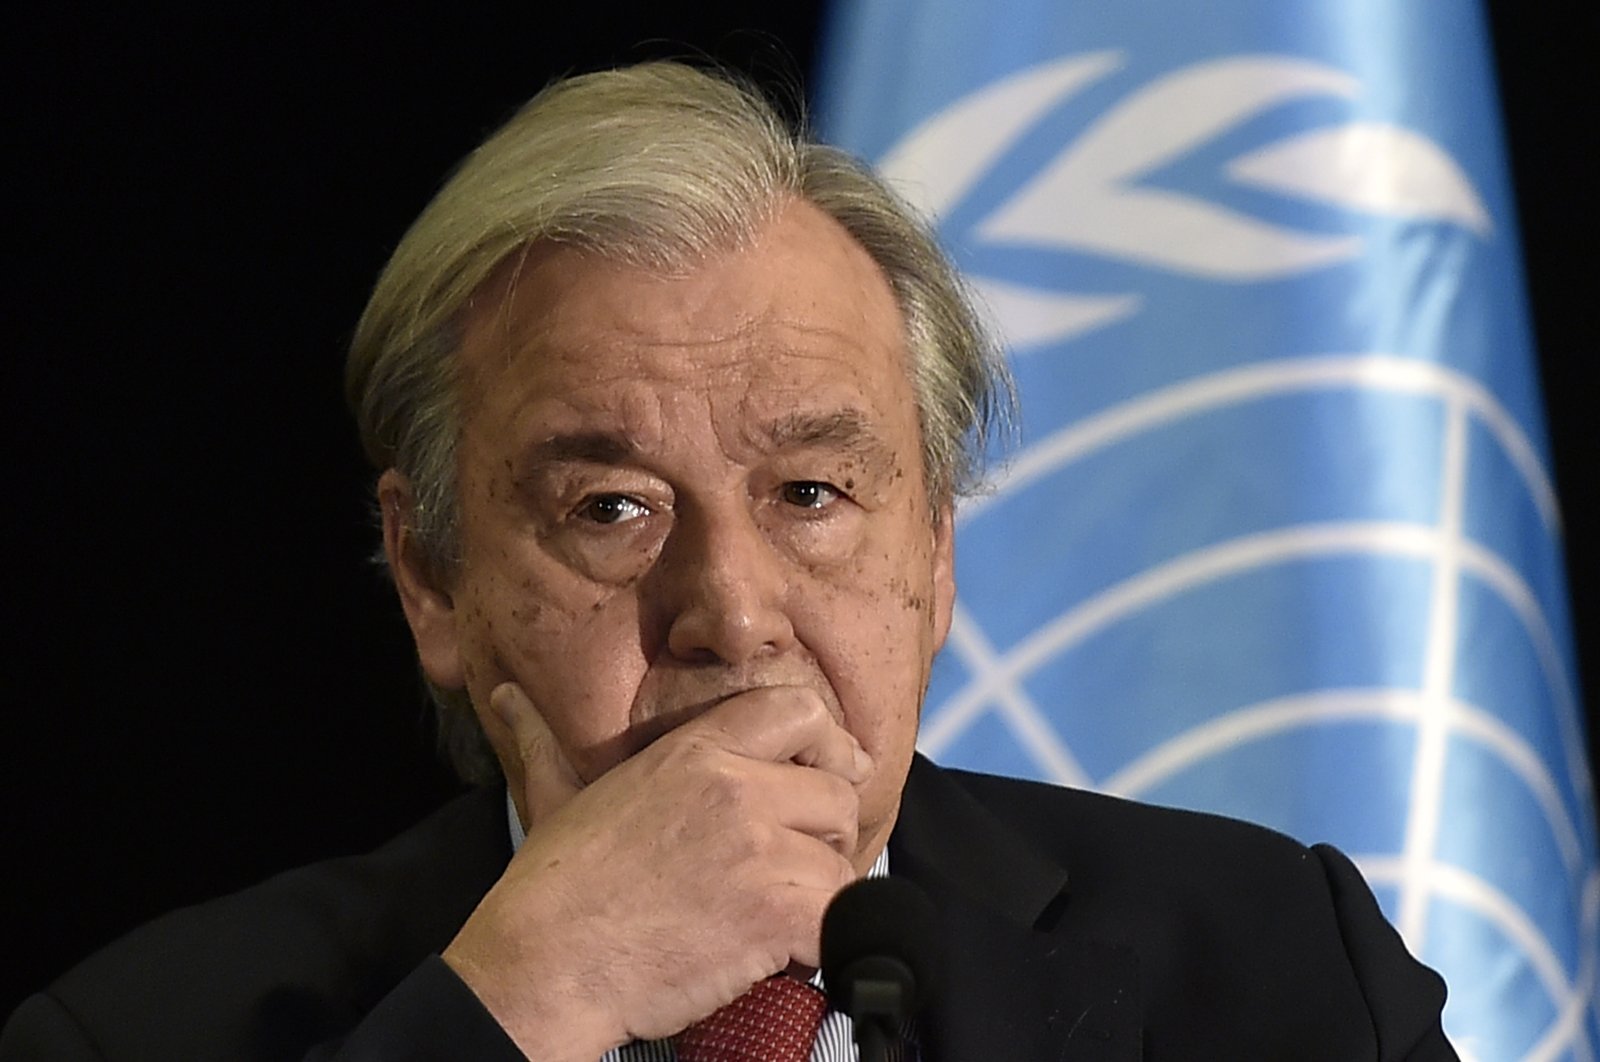 United Nations Secretary-General Antonio Guterres during a press conference at the end of his visit to Lebanon, in Beirut, Lebanon, Dec. 21 2021. (EPA Photo)